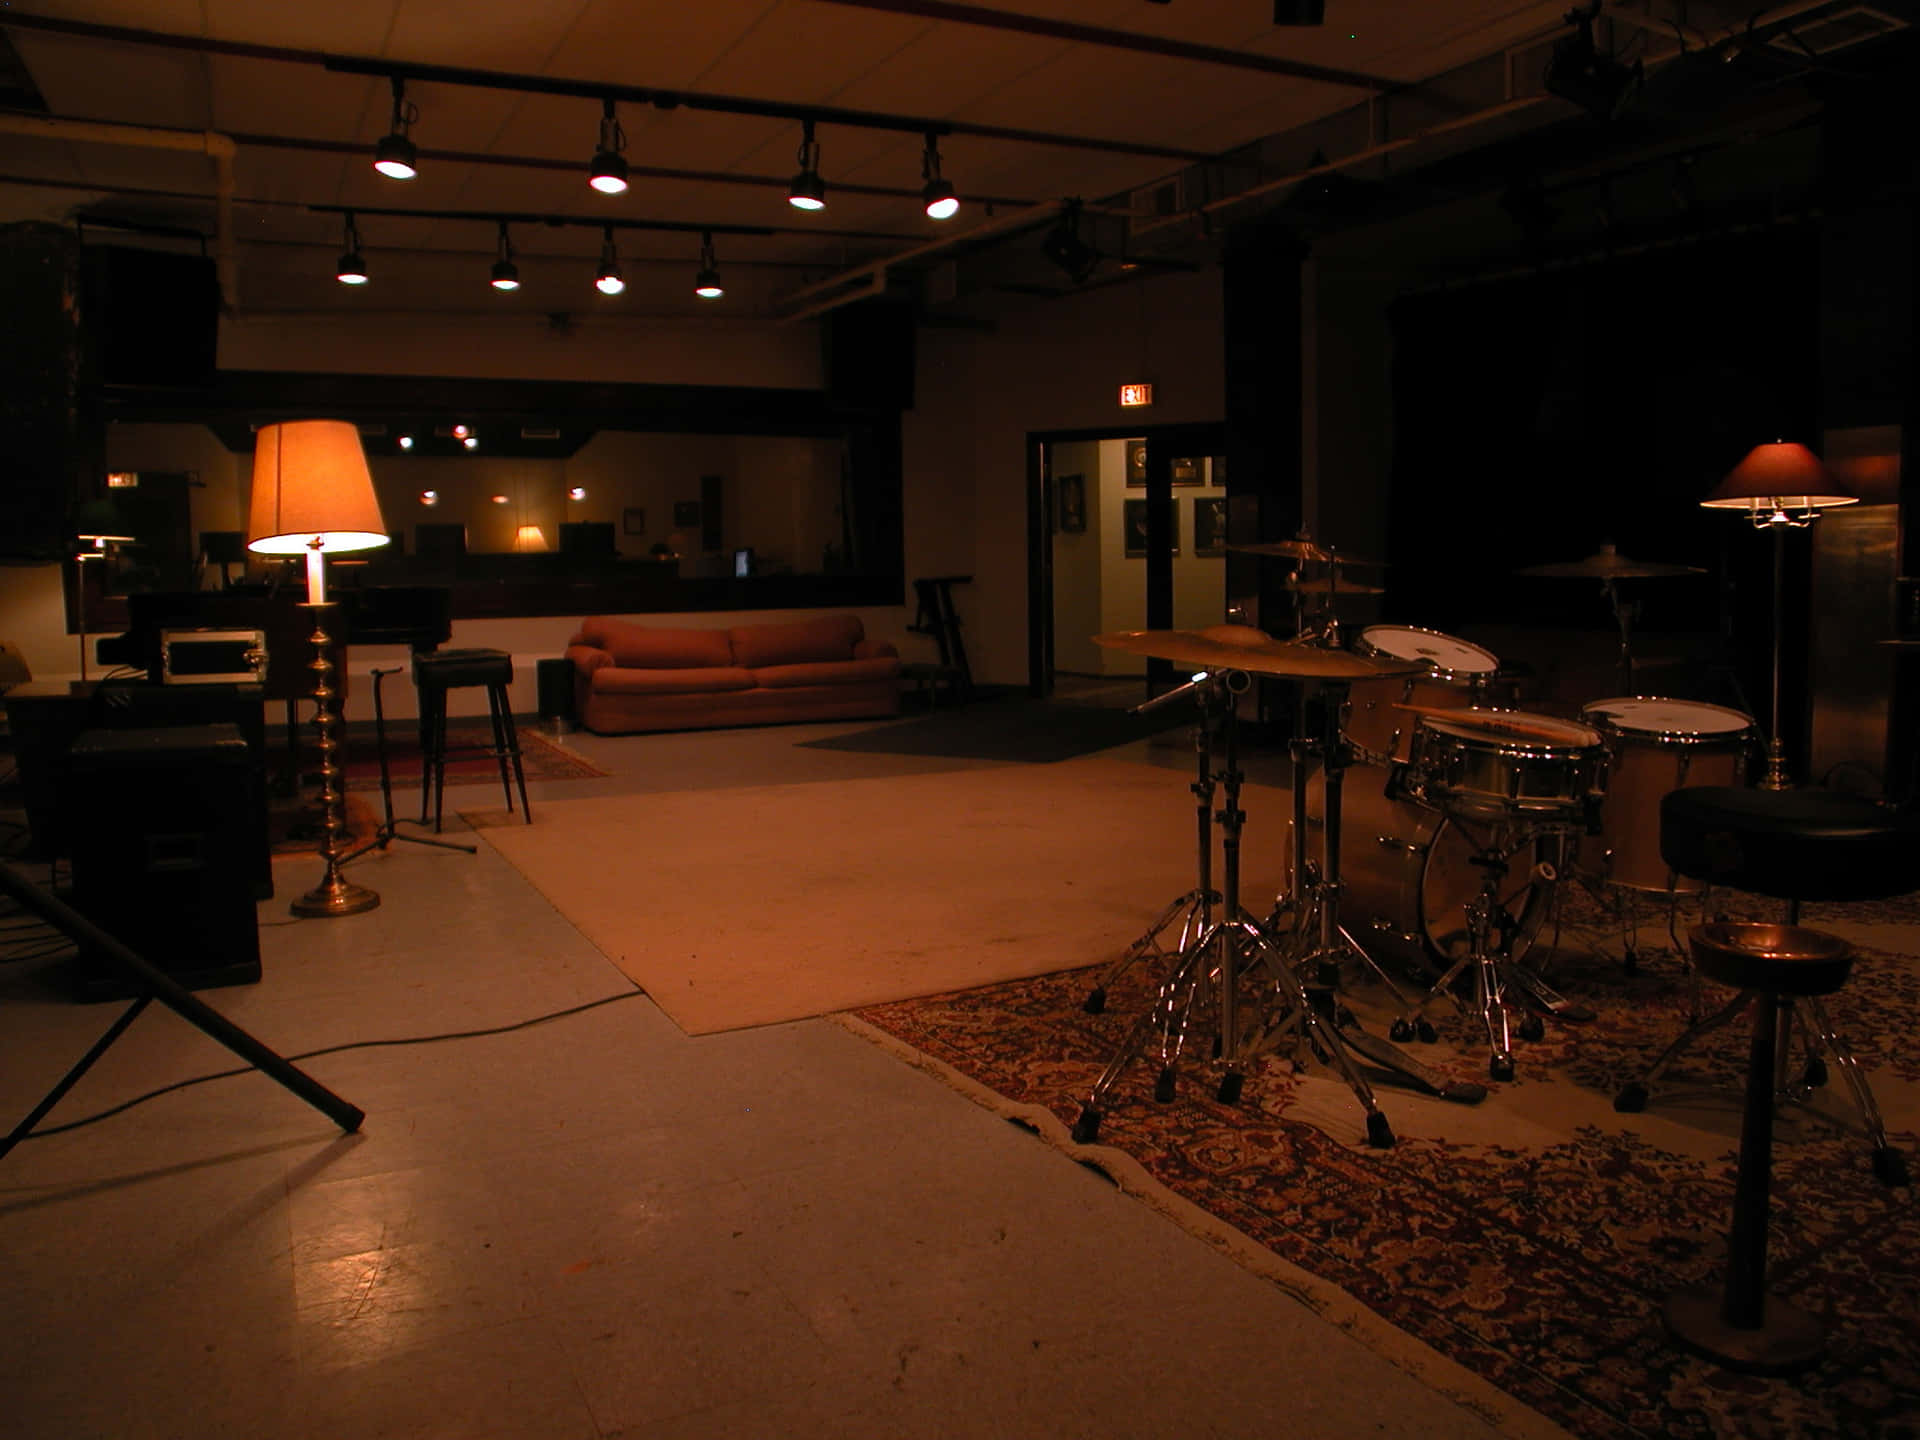 Get lost in a World of Music with a Professional Recording Studio